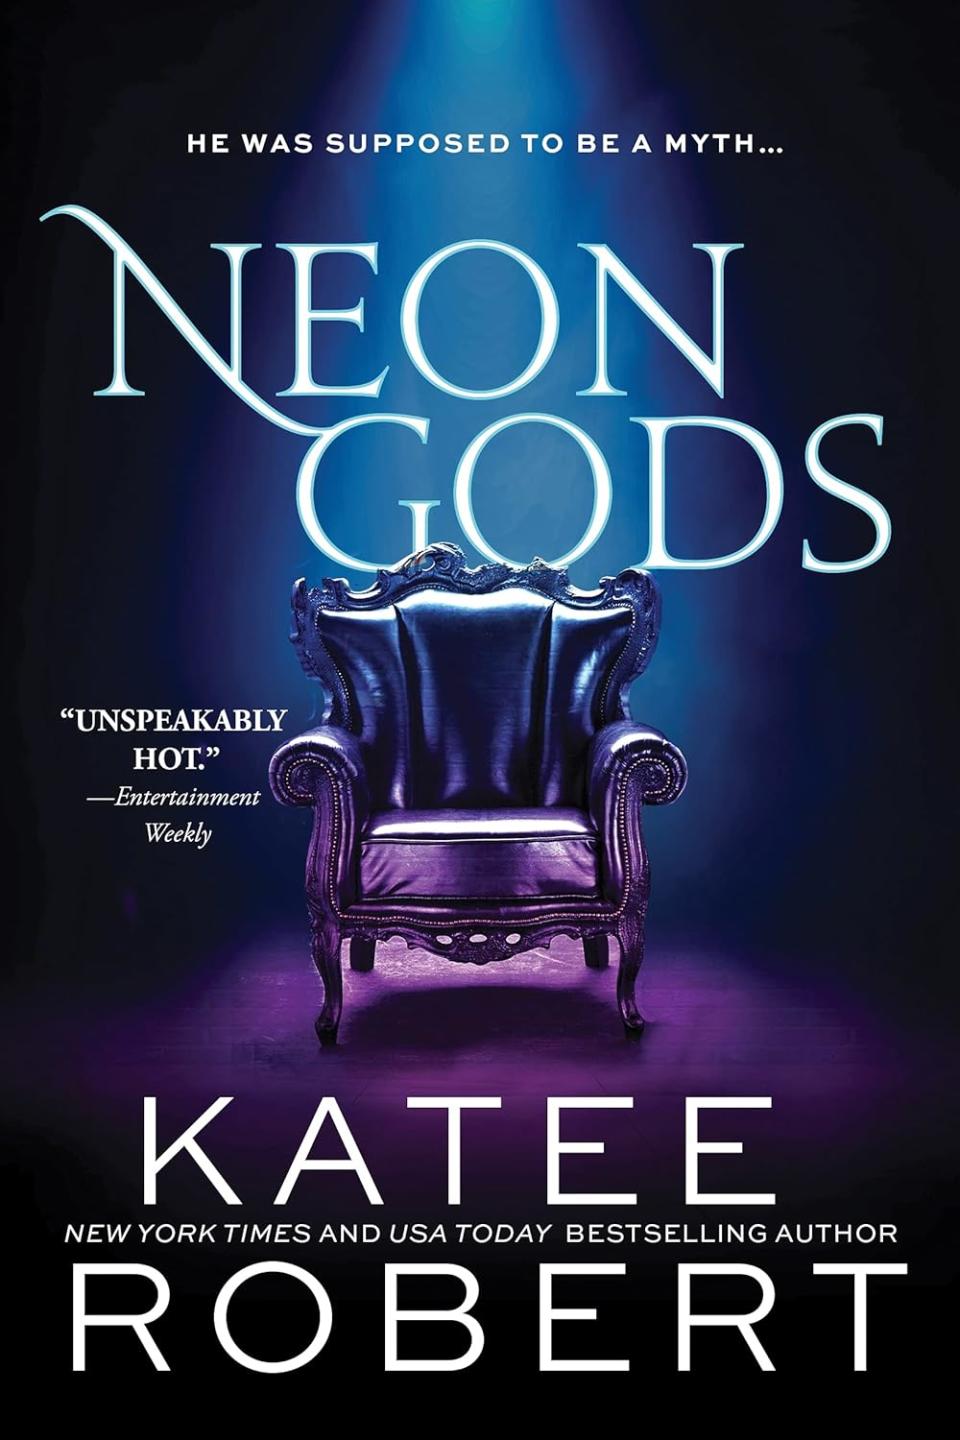 The cover of "Neon Gods" by Katee Robert.